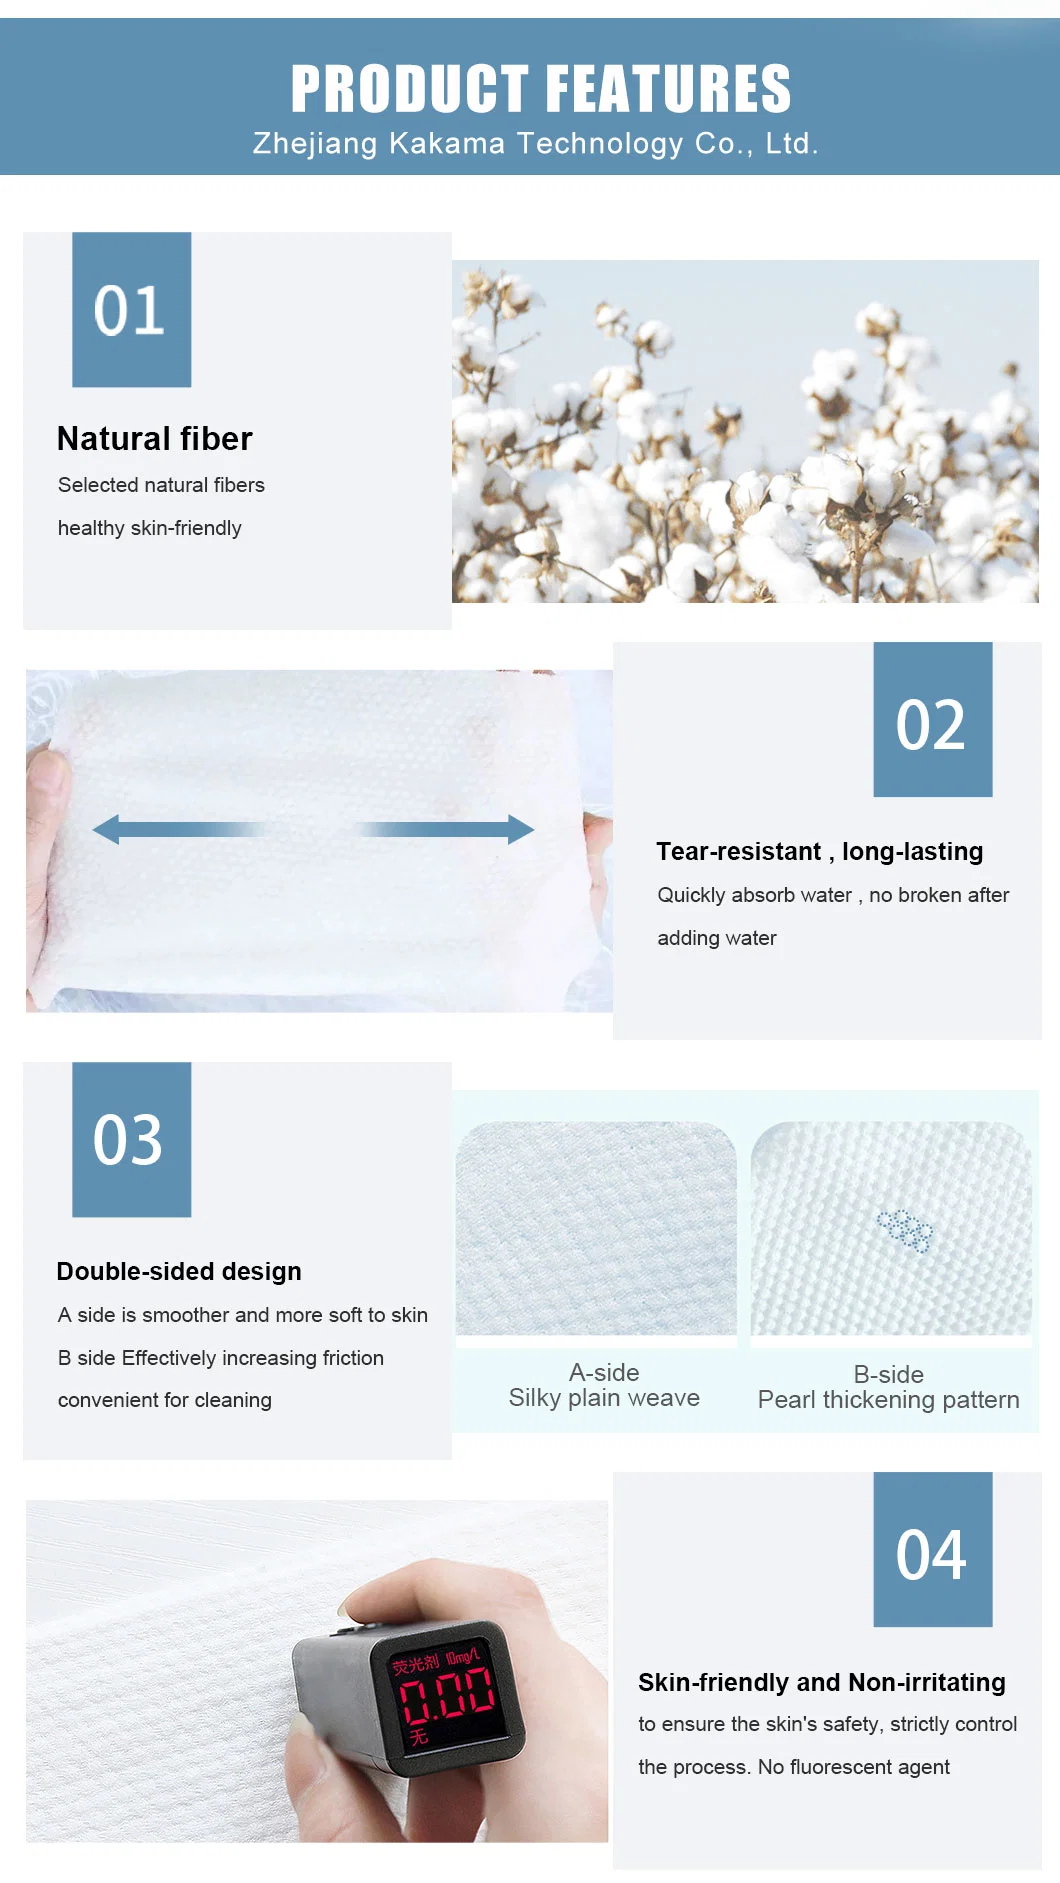 Private Label Disposable Facial Clean Towel for Face SPA Multi Functional Wet and Dry Dual Use Tissue Towel